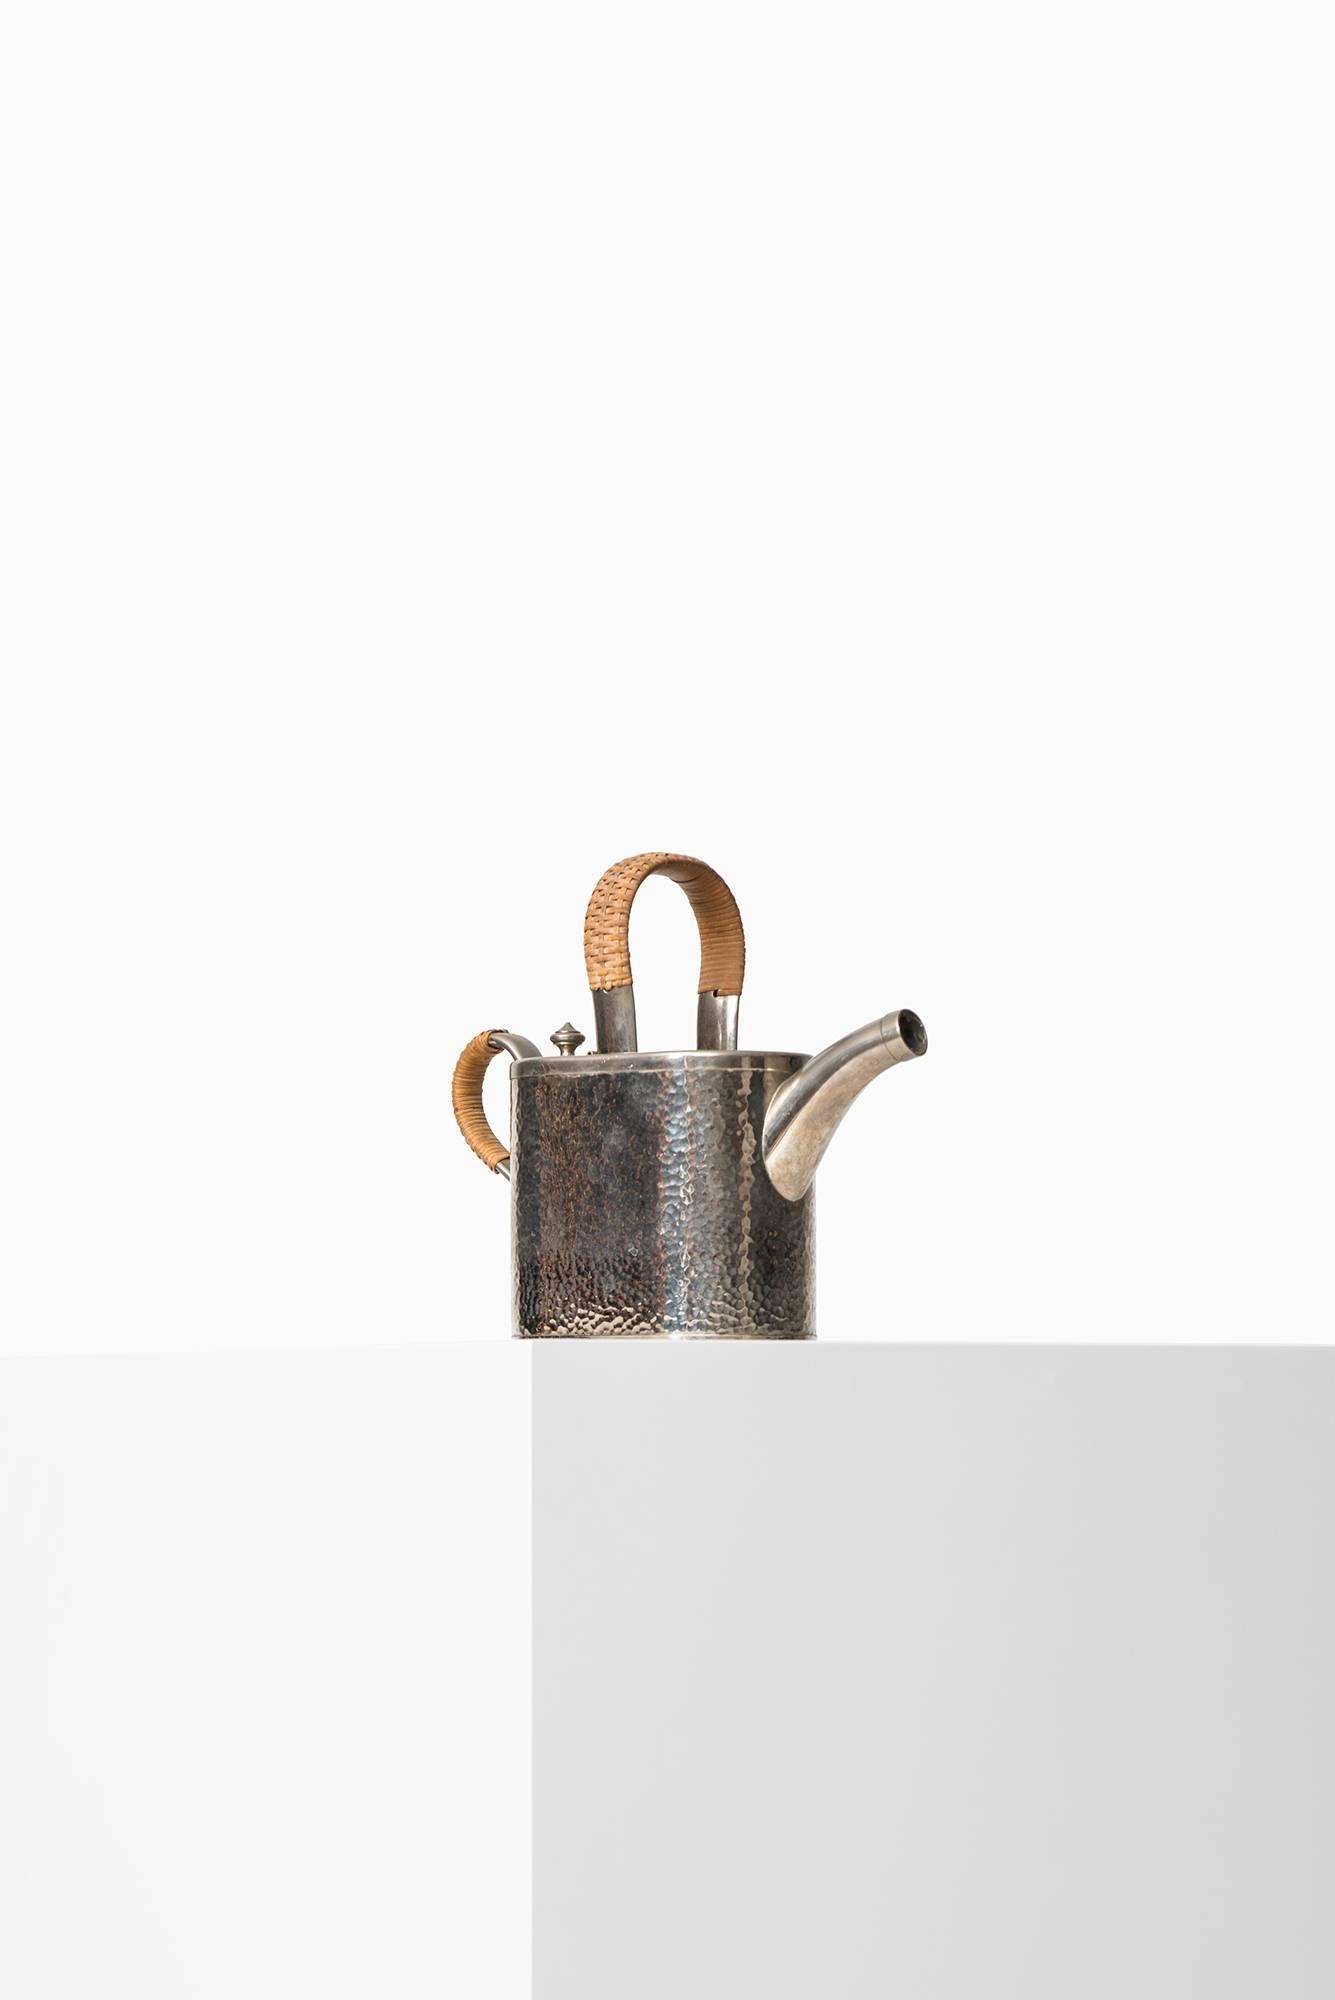 Mid-Century Modern Teapot in Metal and Woven Cane by Carl Deffner in Germany